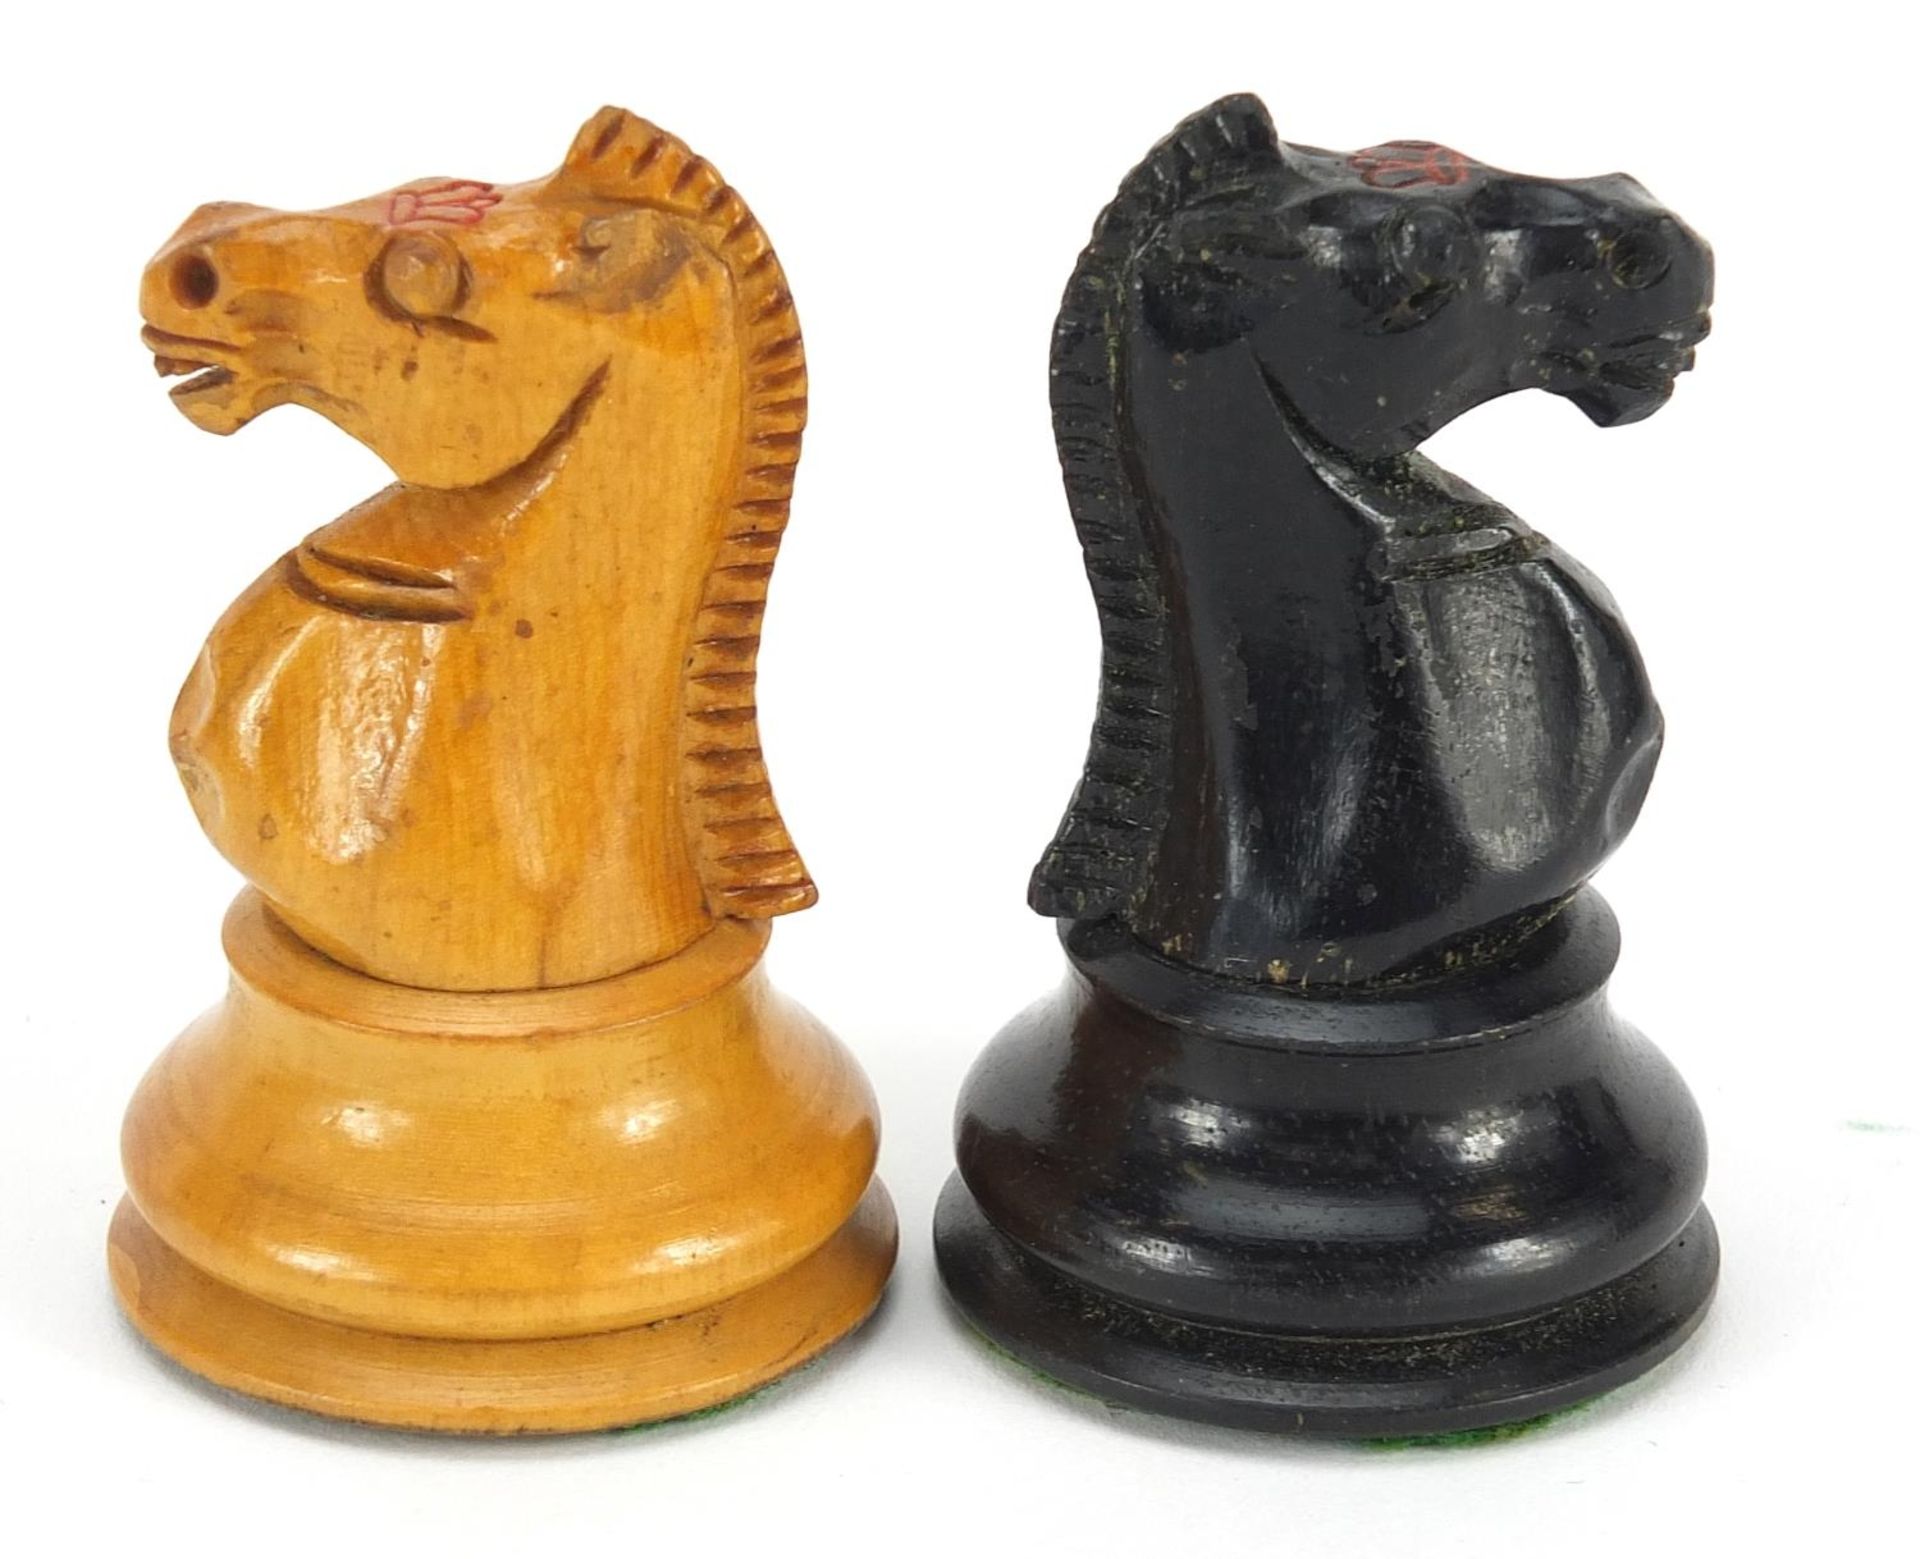 Boxwood and ebony Staunton chess set with mahogany case, possibly by Jaques, the largest piece 8.5cm - Image 6 of 8